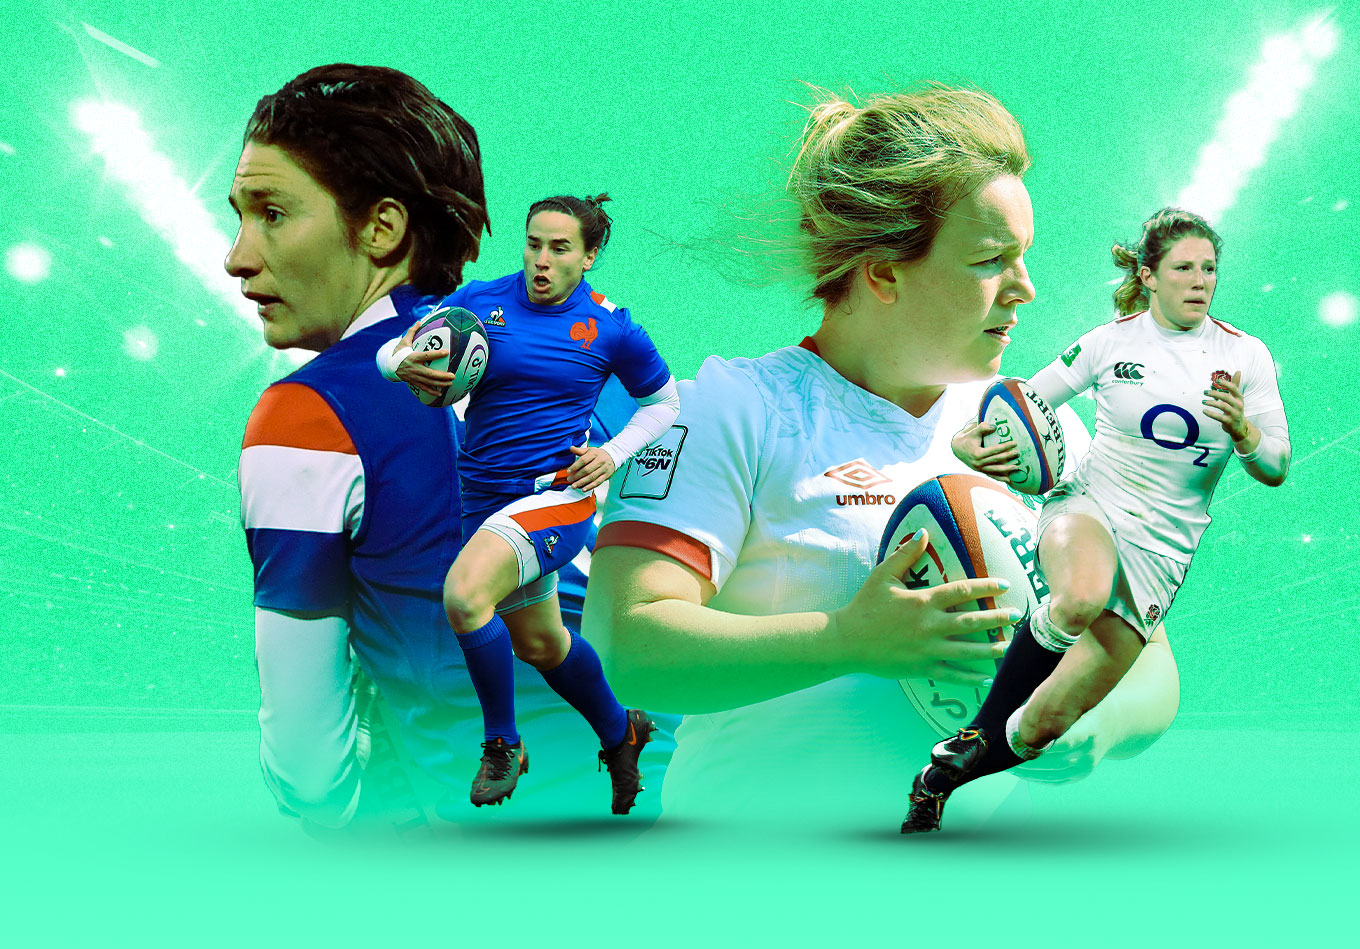 Le Crunch: Previewing the Women’s Six Nations Decider